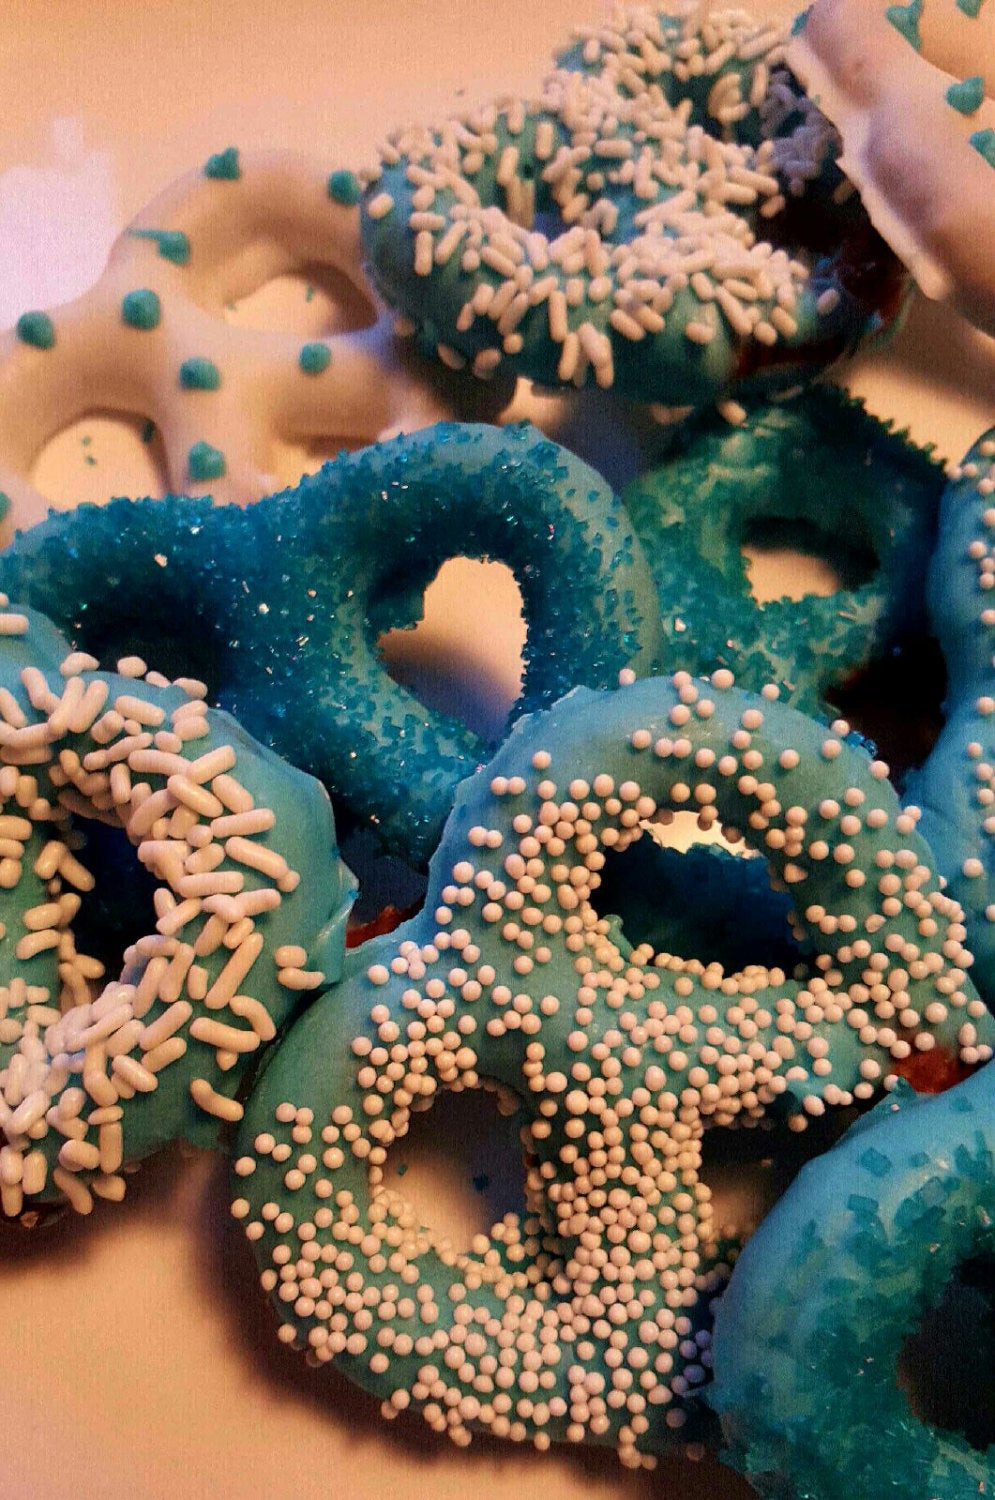 Gourmet Chocolate Pretzels
 Gourmet Chocolate Covered Pretzels White Chocolate with Teal